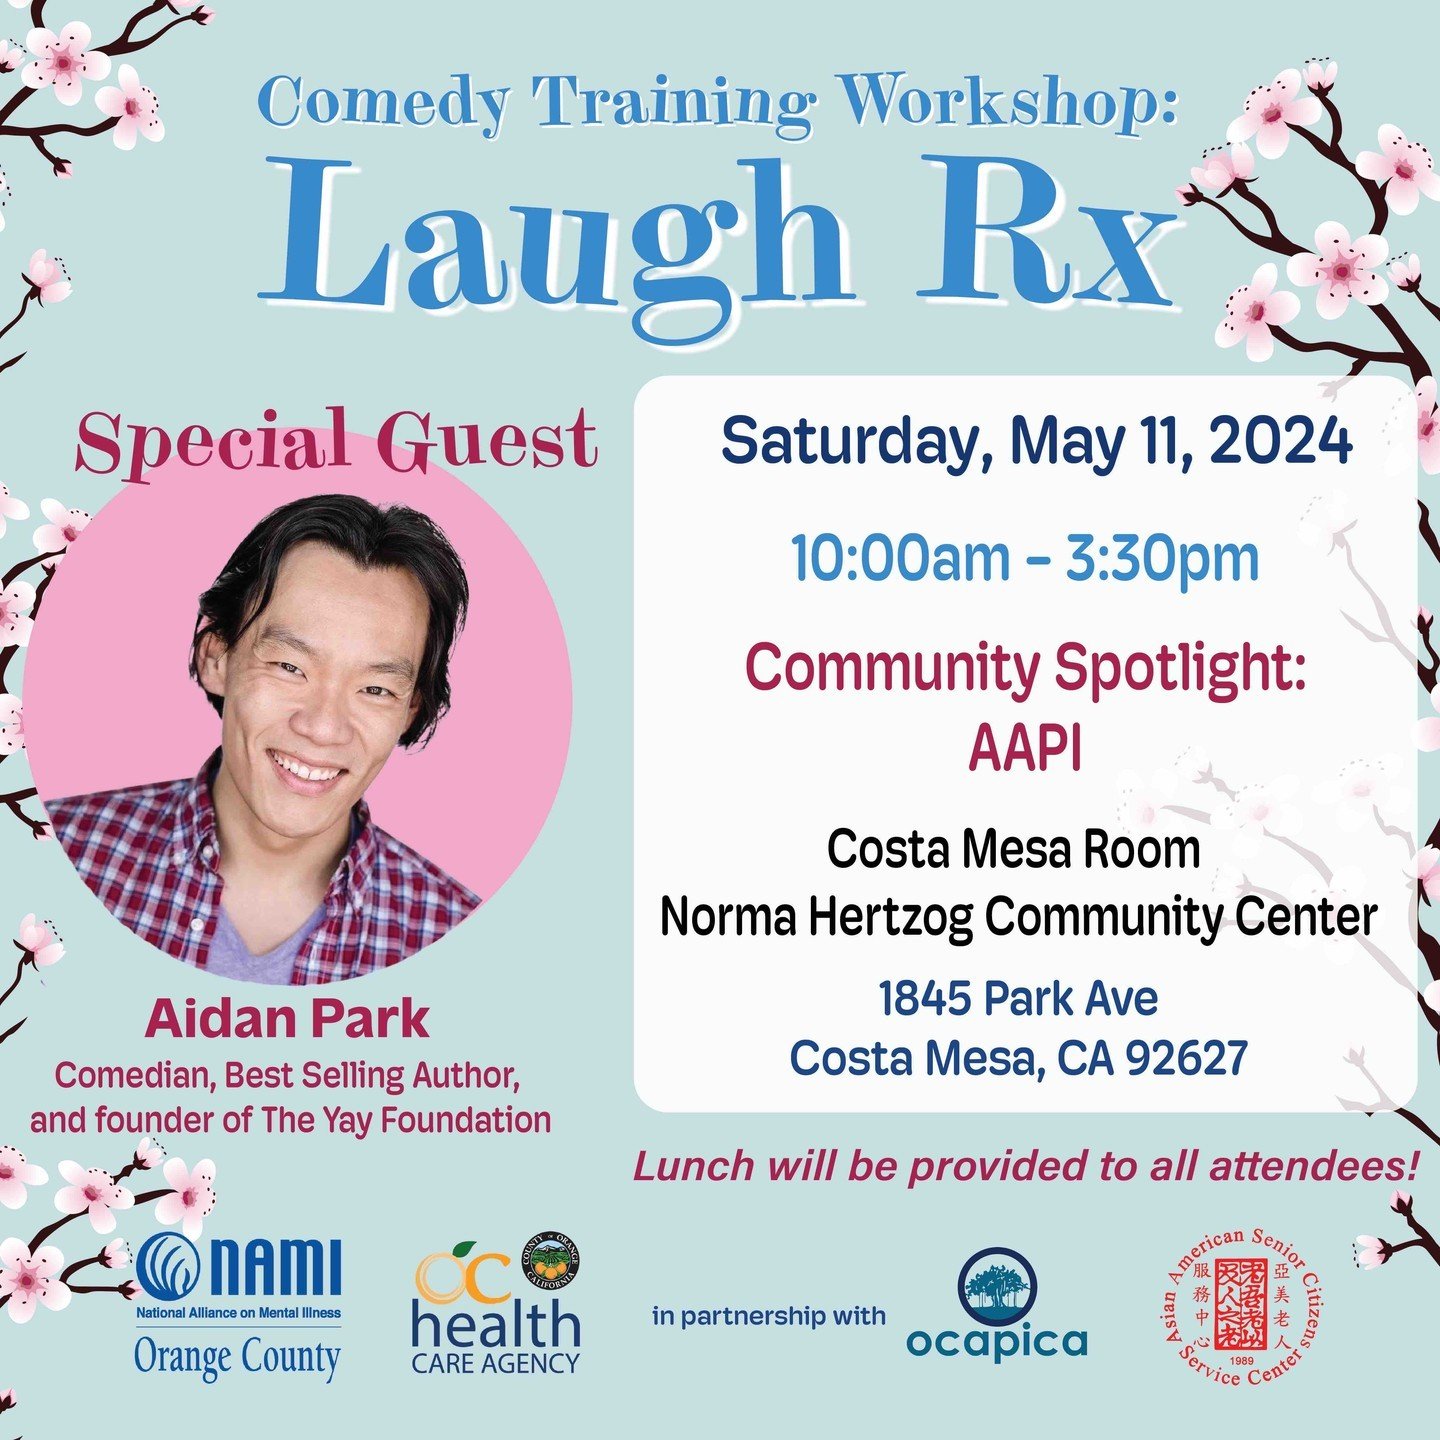 Share a laugh with us! 🎤 Our next Laugh Rx Stand-up Comedy Workshop will take place on Saturday, May 11th at the Norma Hertzog Community Center in Costa Mesa, CA. 🌟 The Workshop will be led by Aidan Park, professional comedian, bestselling author, 